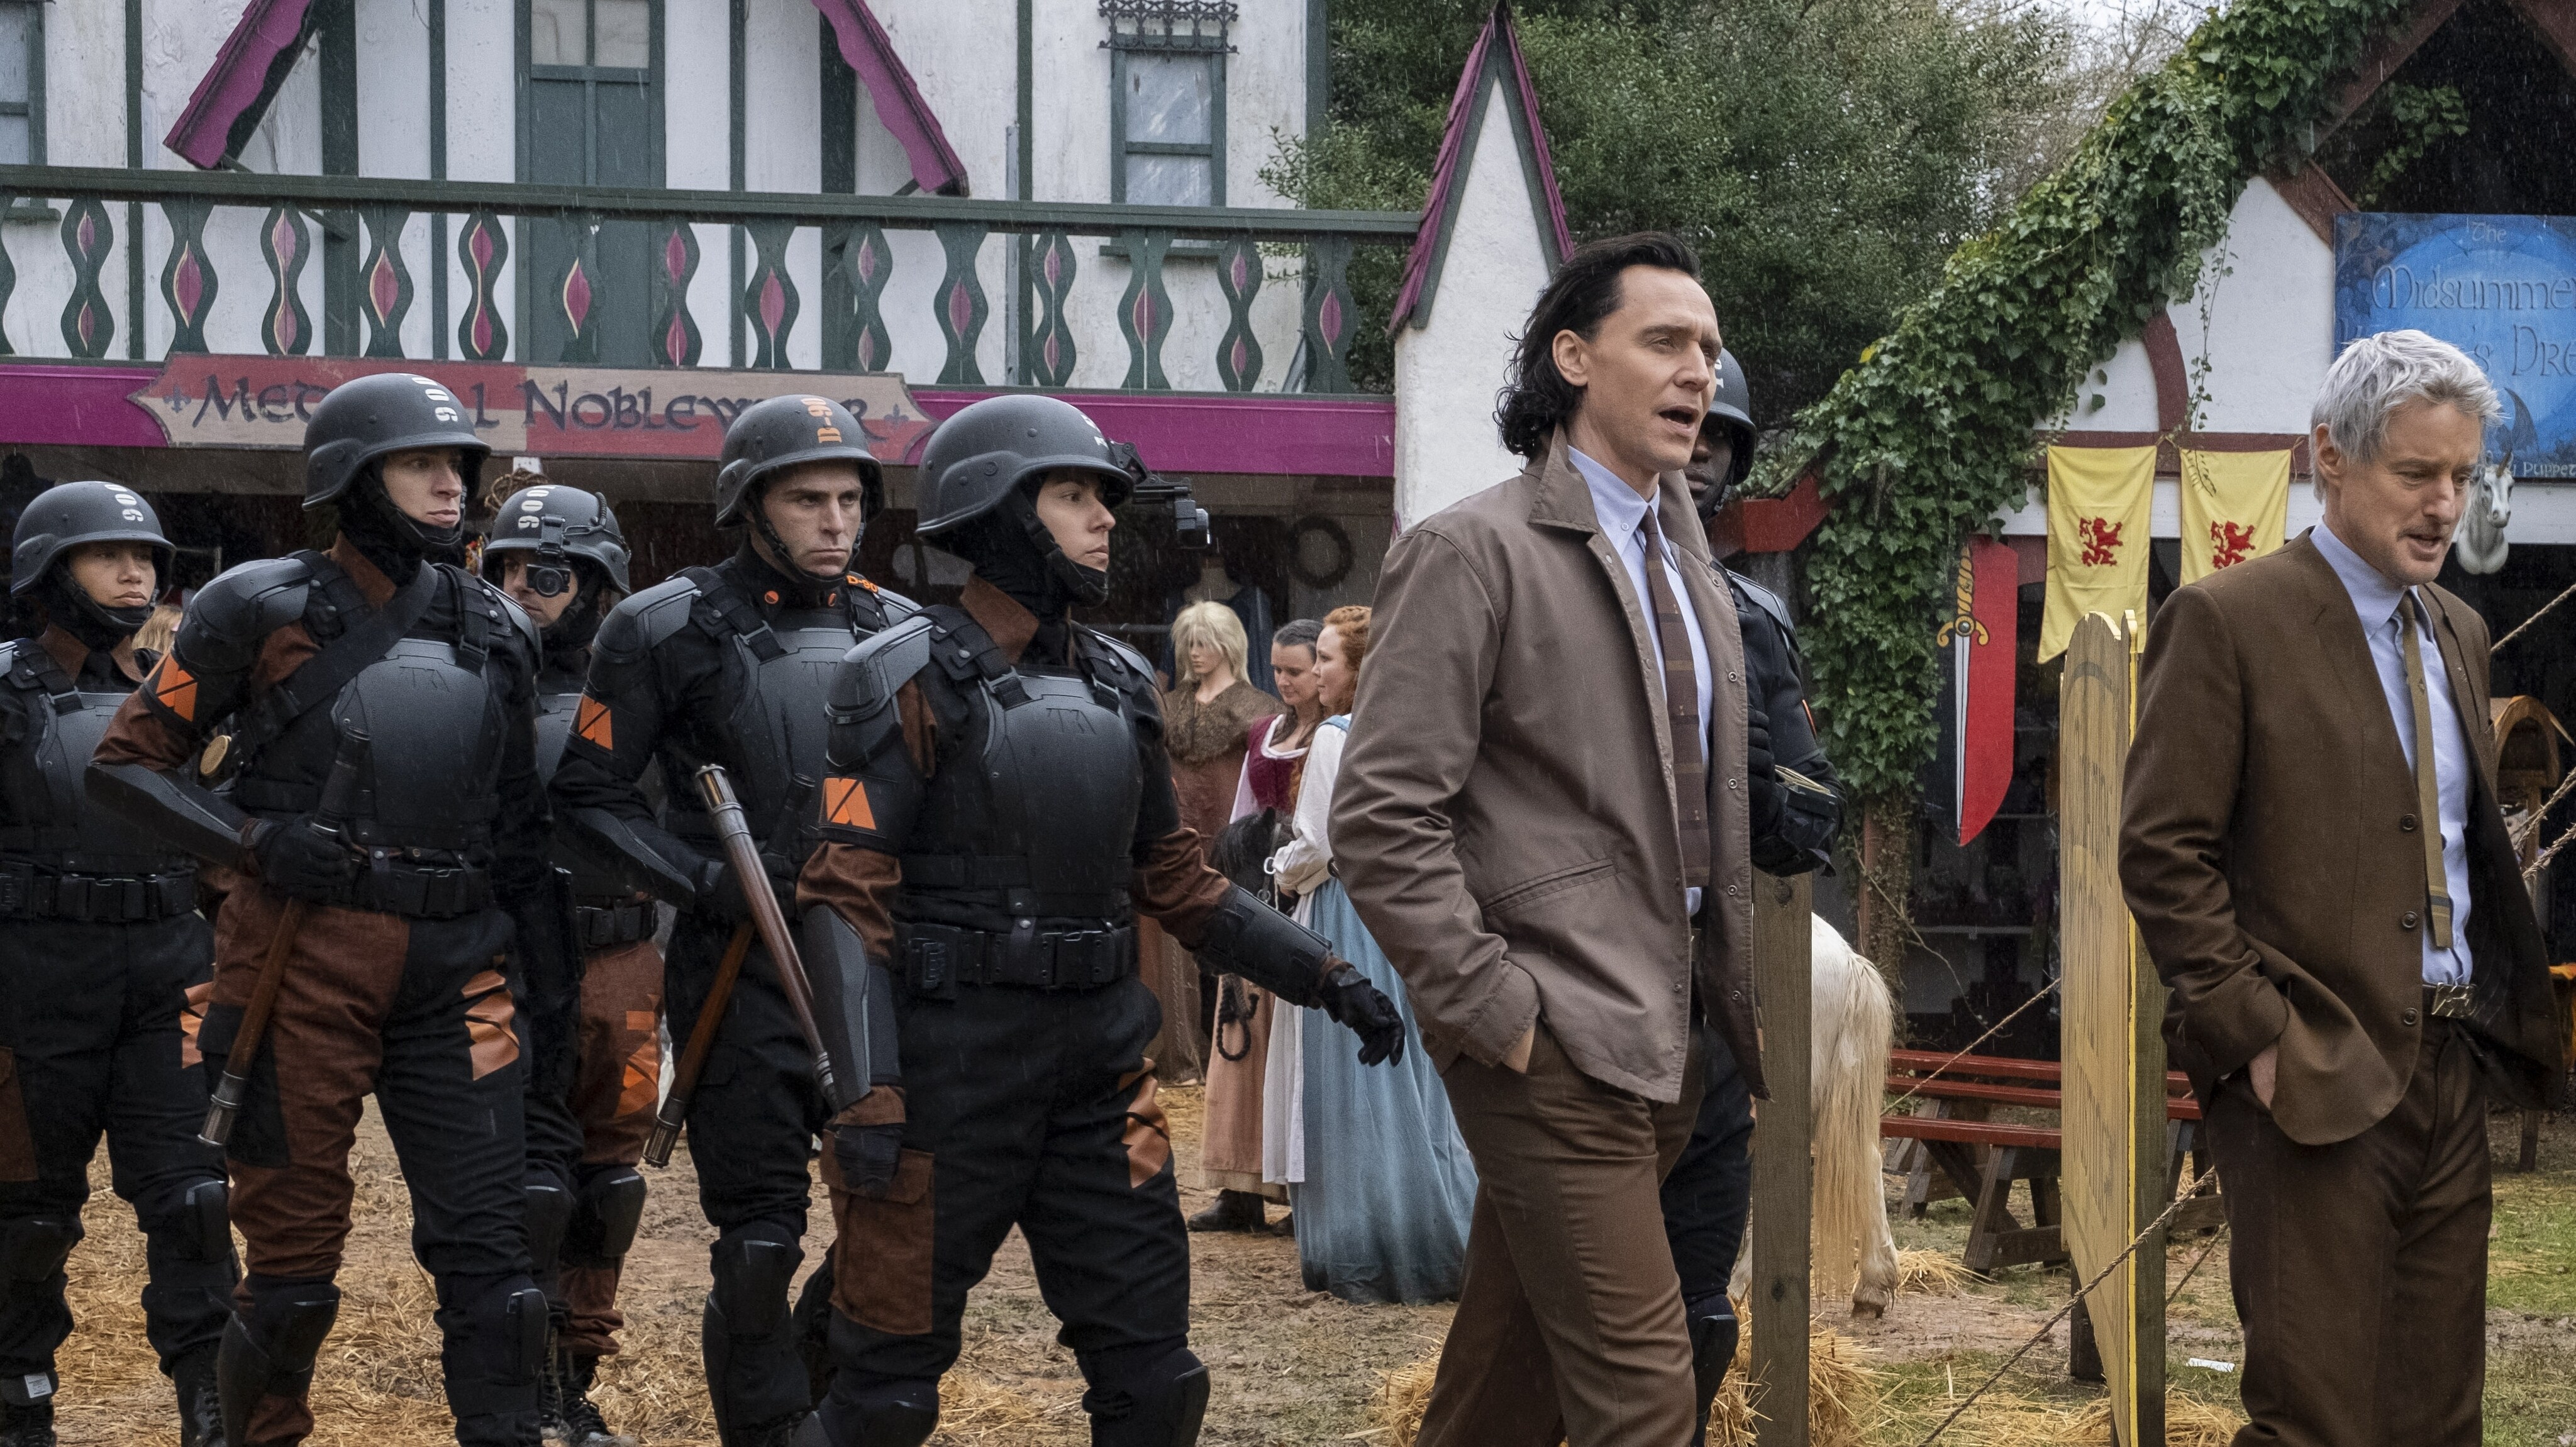 (Center to right): Loki (Tom Hiddleston) and Mobius (Owen Wilson) in Marvel Studios' LOKI, exclusively on Disney+. Photo by Chuck Zlotnick. ©Marvel Studios 2021. All Rights Reserved.